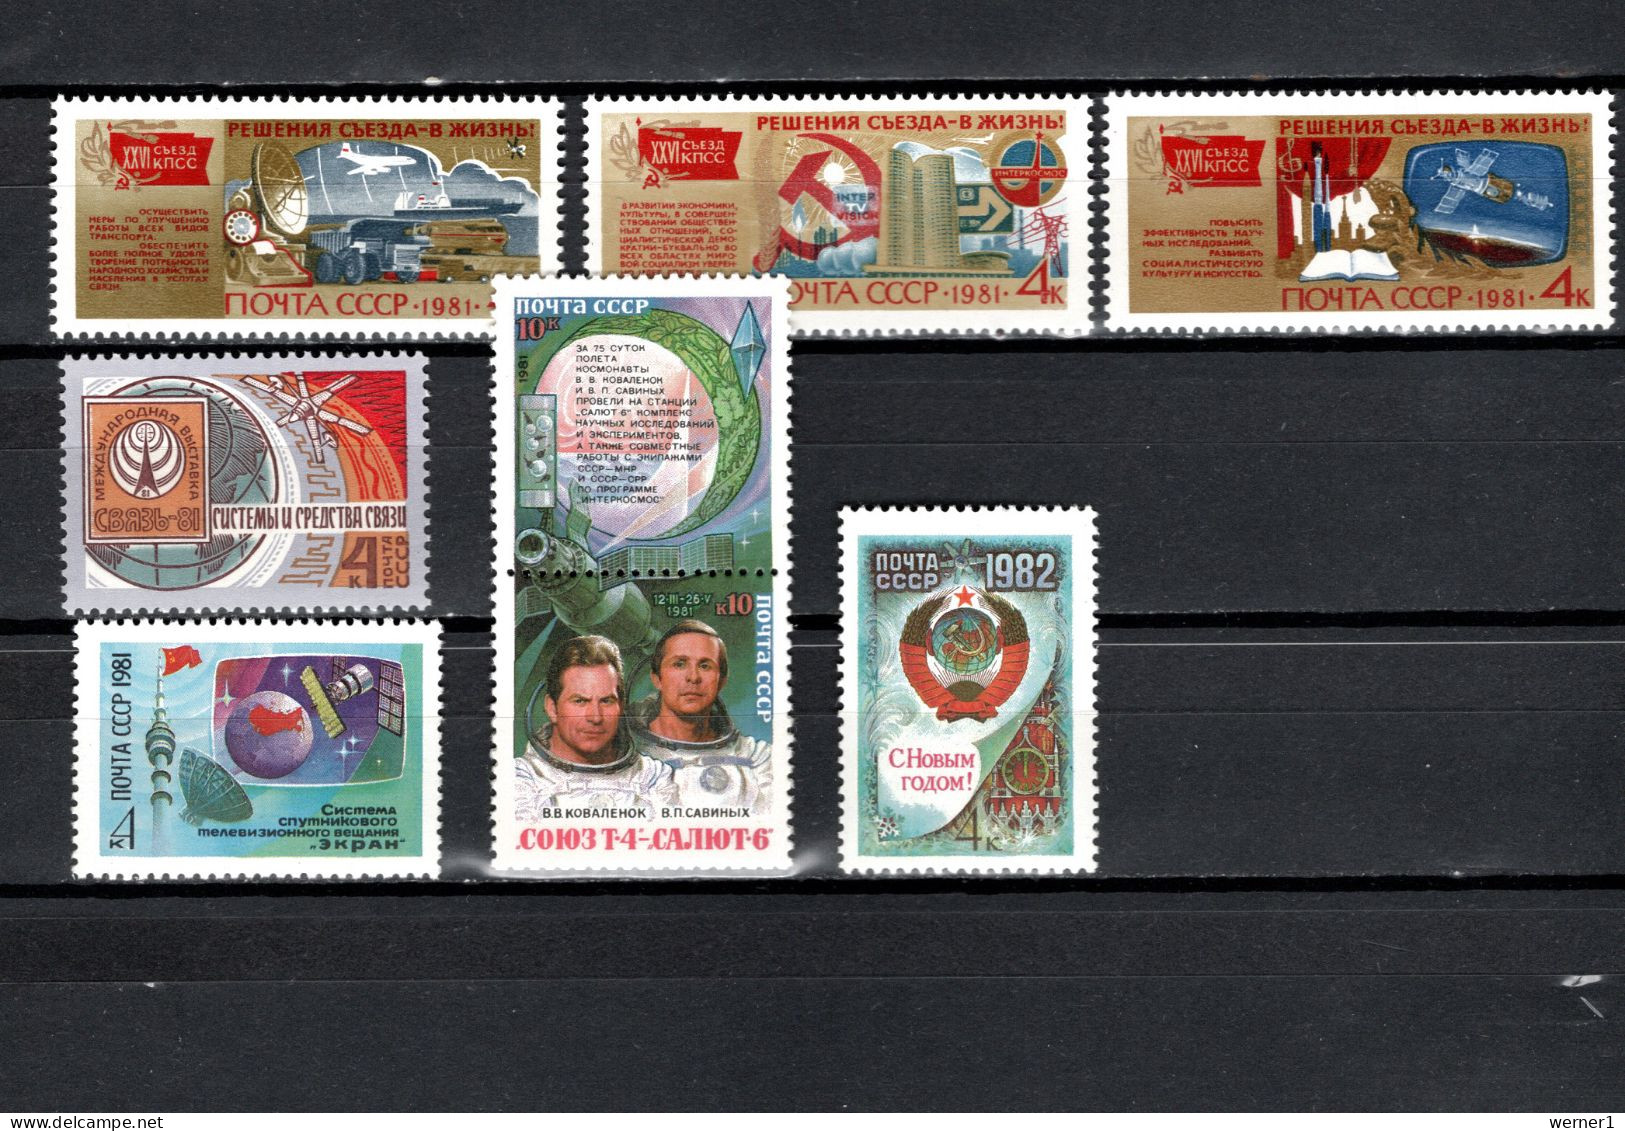 USSR Russia 1981 Space, Communist Party Congress, SWJAS '81, Ekran Satellite, Saljut 6, New Year 8 Stamps MNH - Russia & URSS